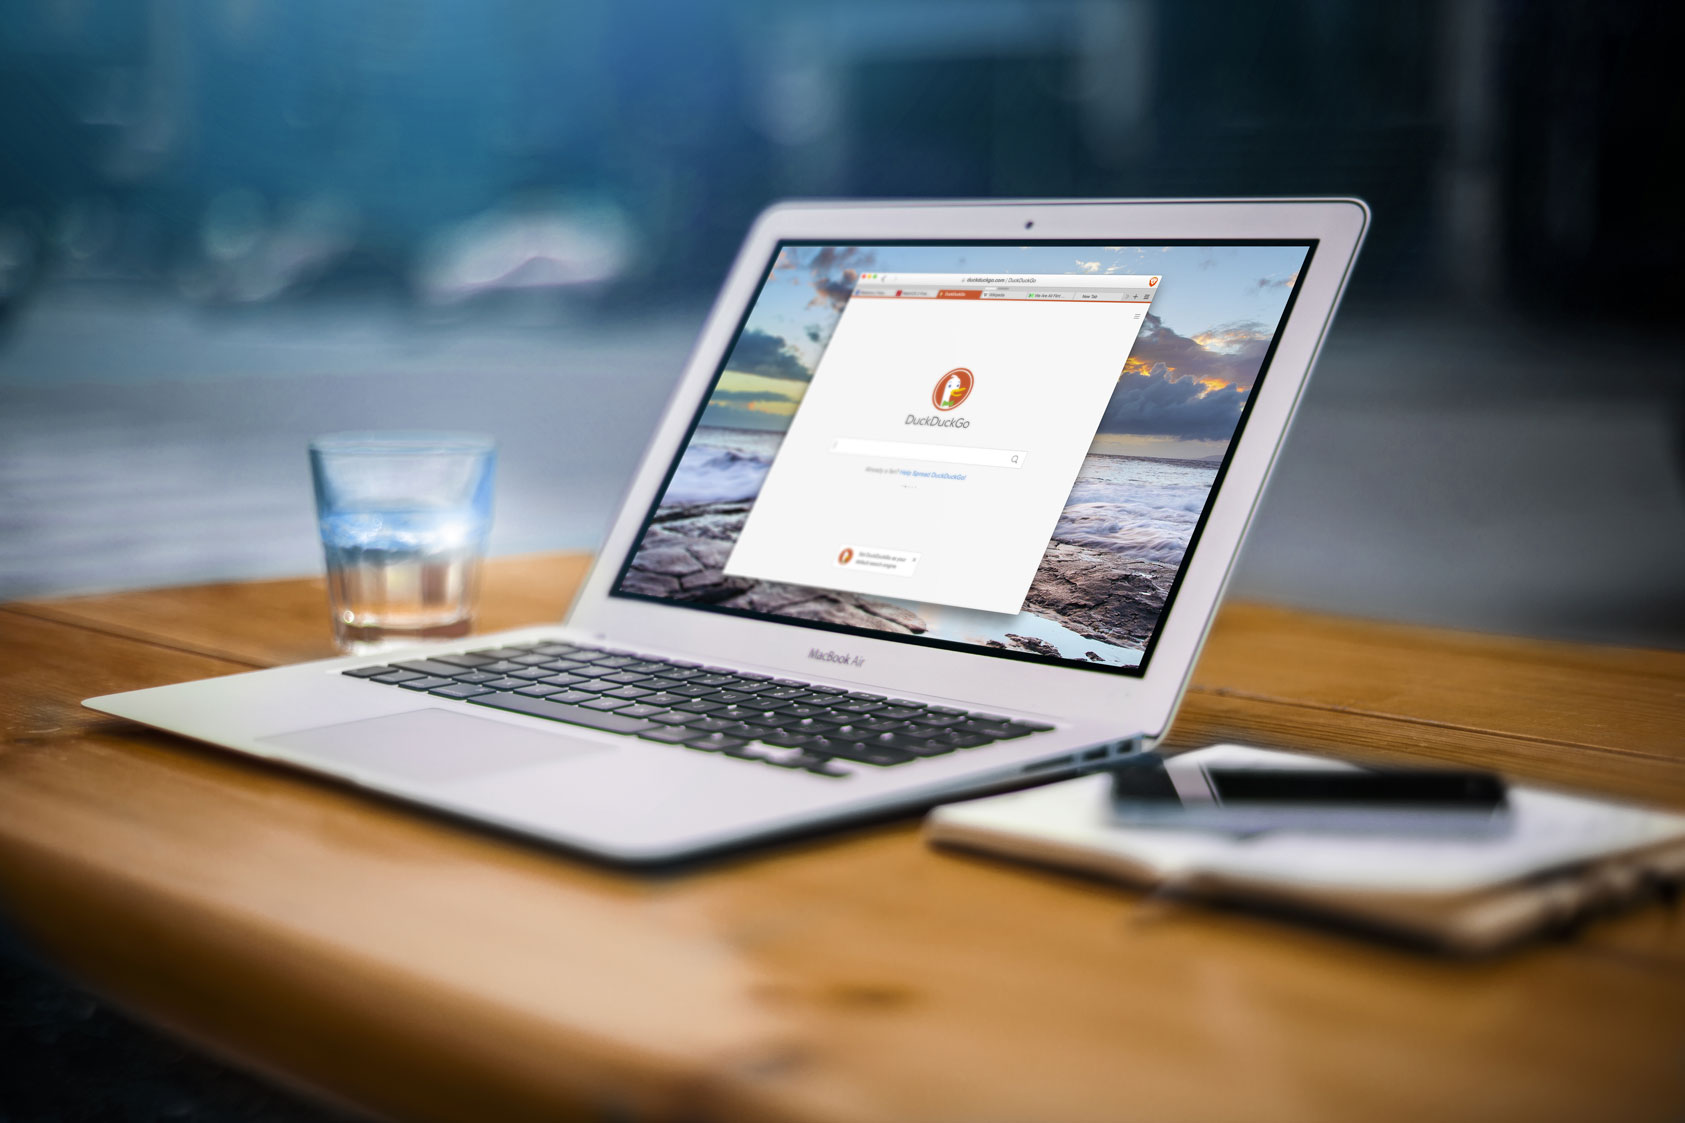 brave browser coin